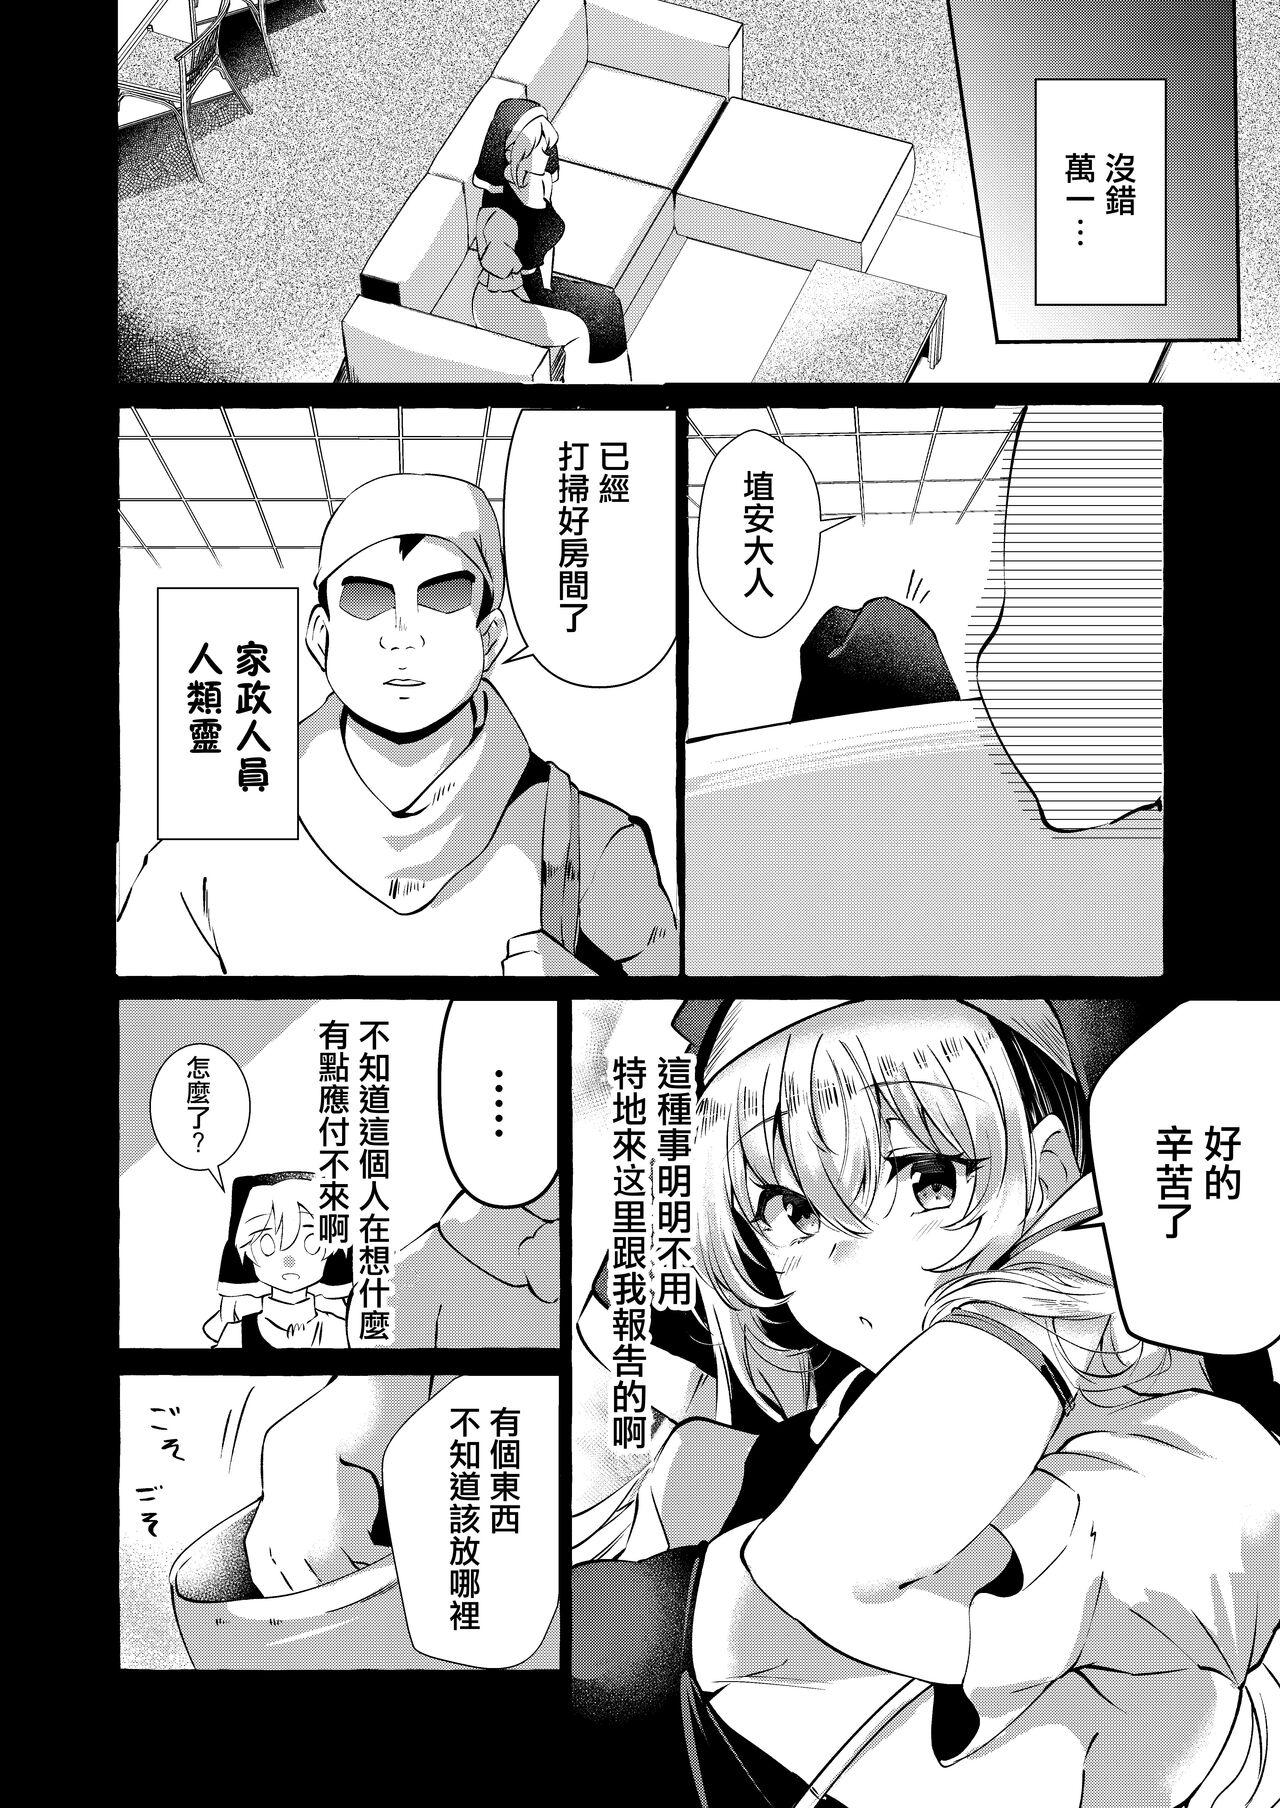 Brother 妄想に肢体を委ねて - Touhou project Real Amature Porn - Page 9